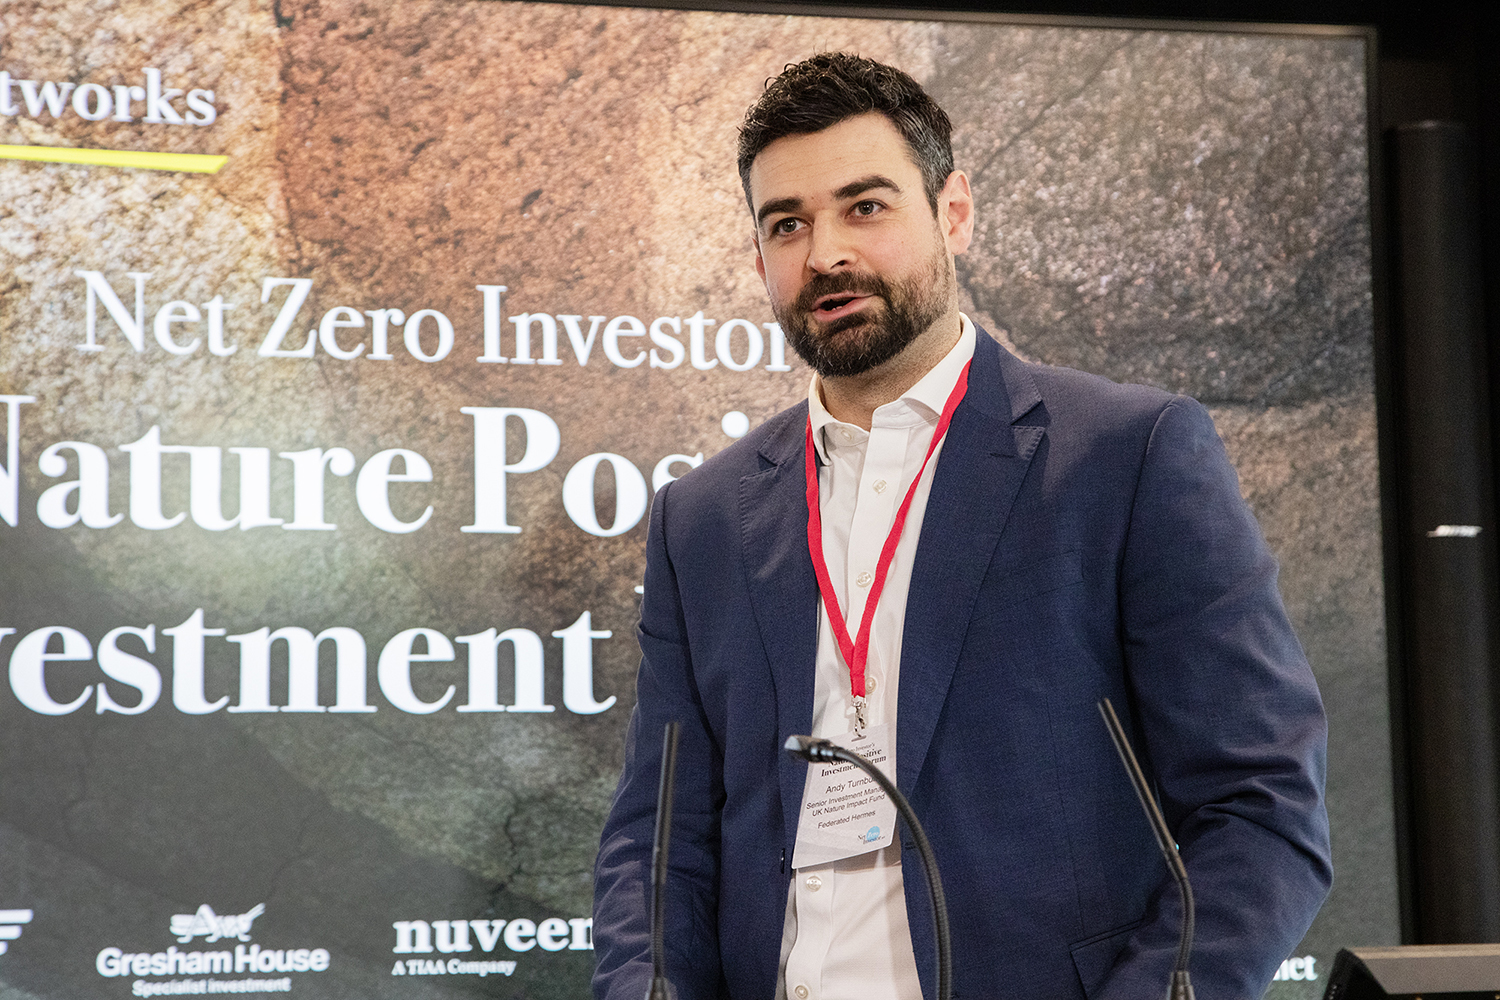 In pictures: NZI’s Nature Positive Investment Forum